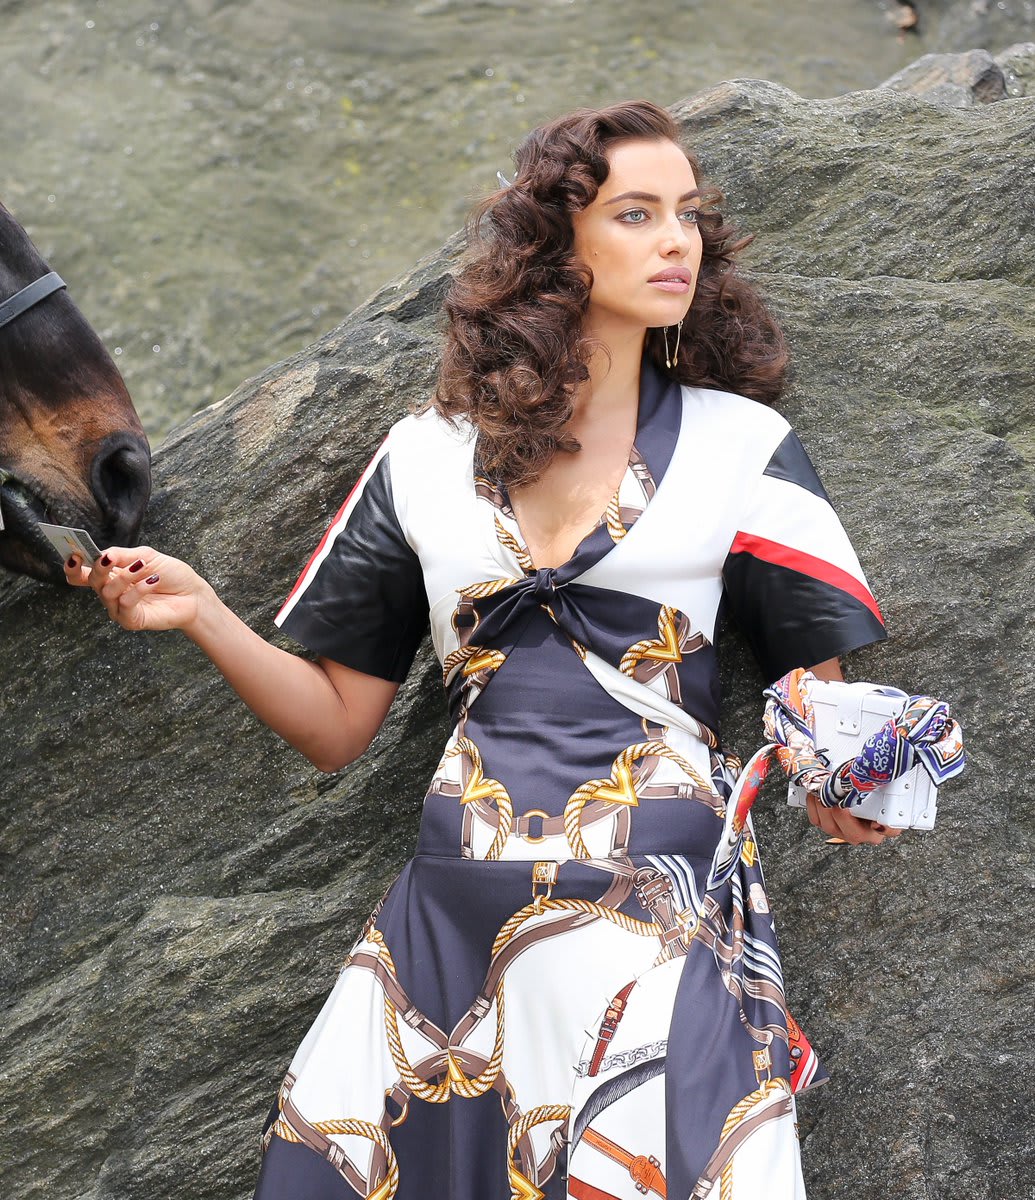 Celebrity Sightings: Irina Shayk feeds her ID to a horse in Central Park